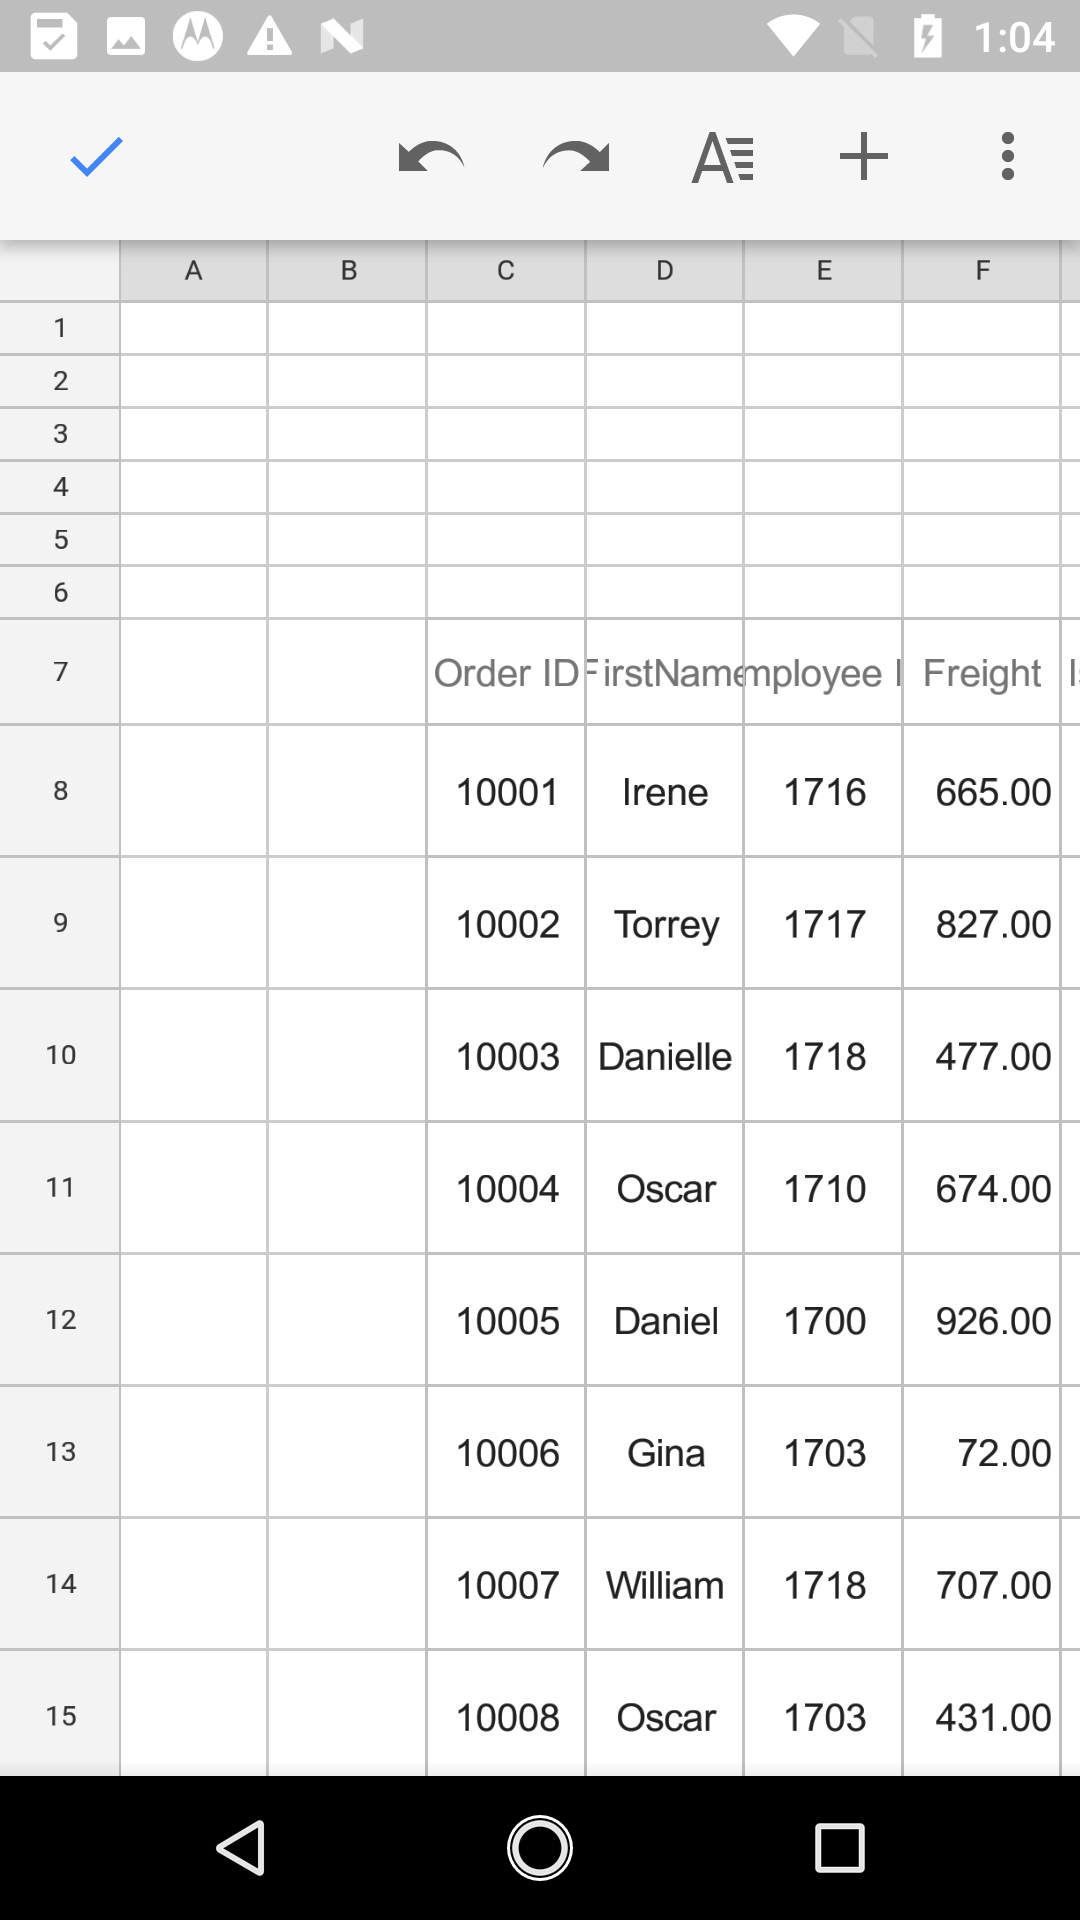 Export DataGrid to Excel format from the specified column index